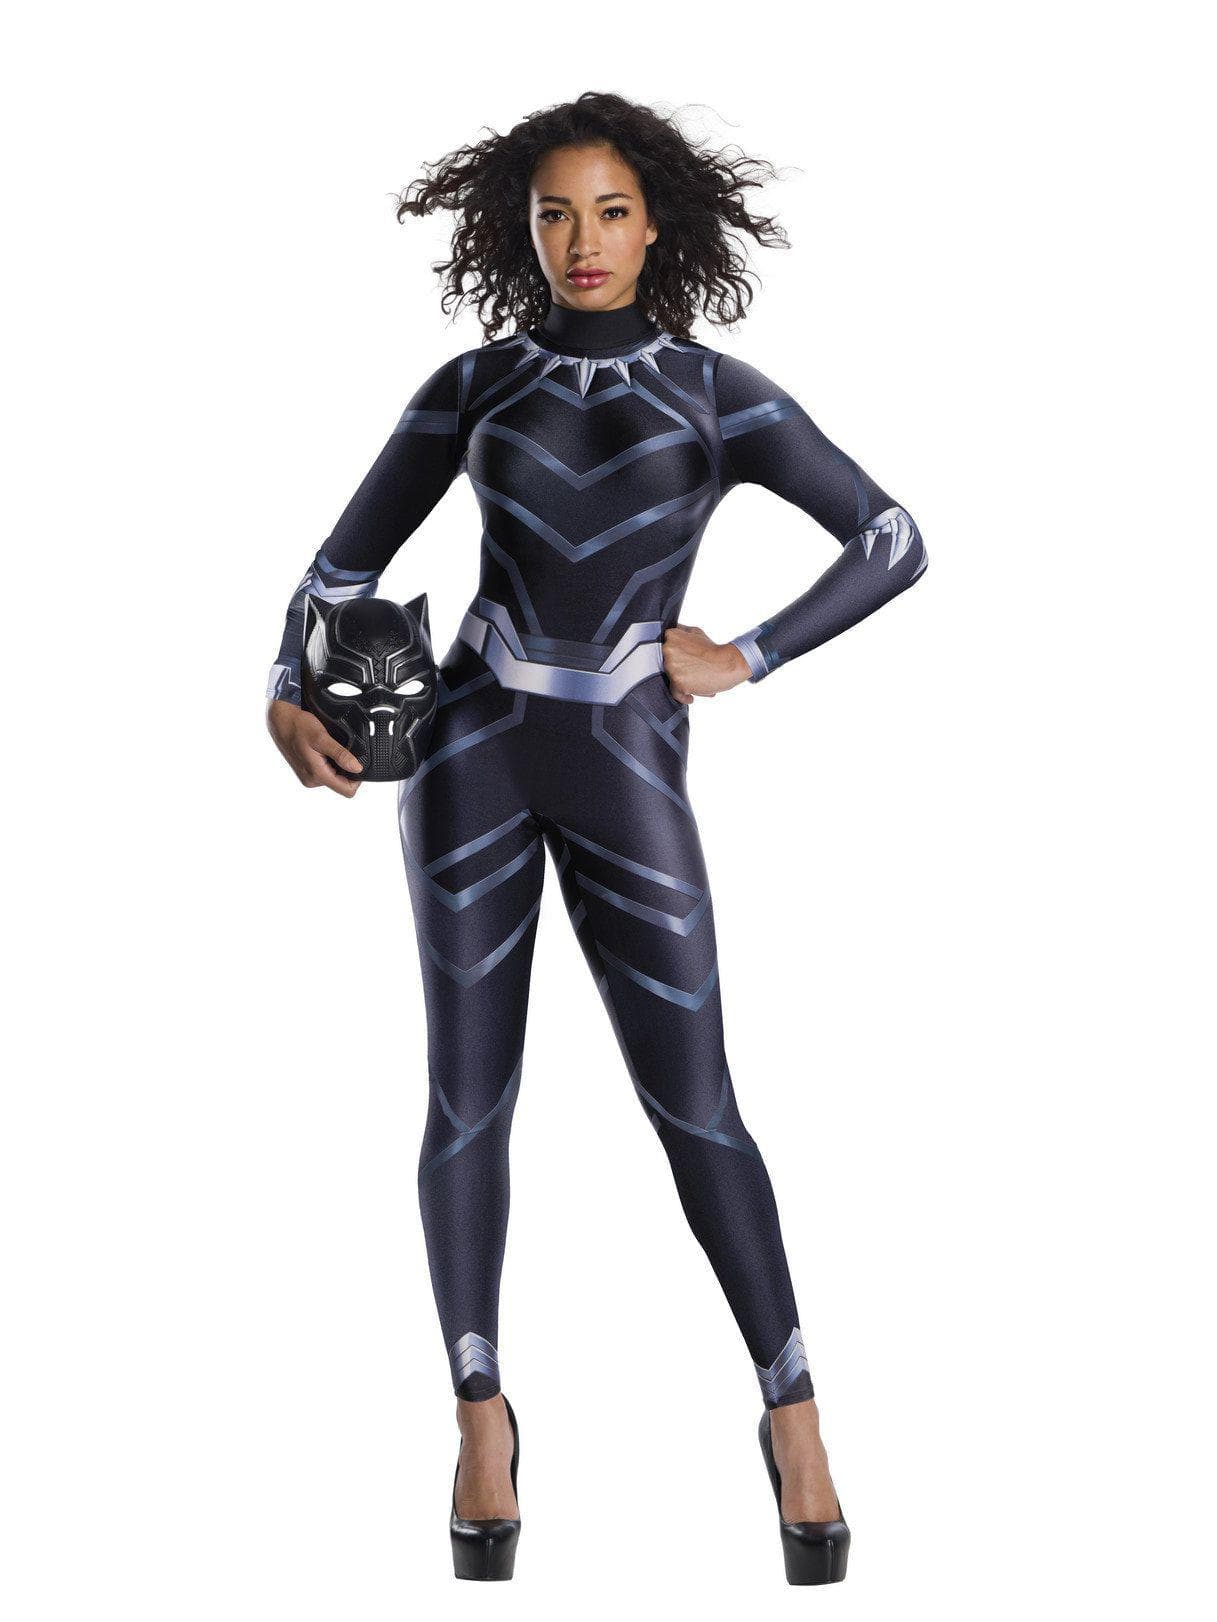 Adult Black Panther Black Panther Costume - costumes.com